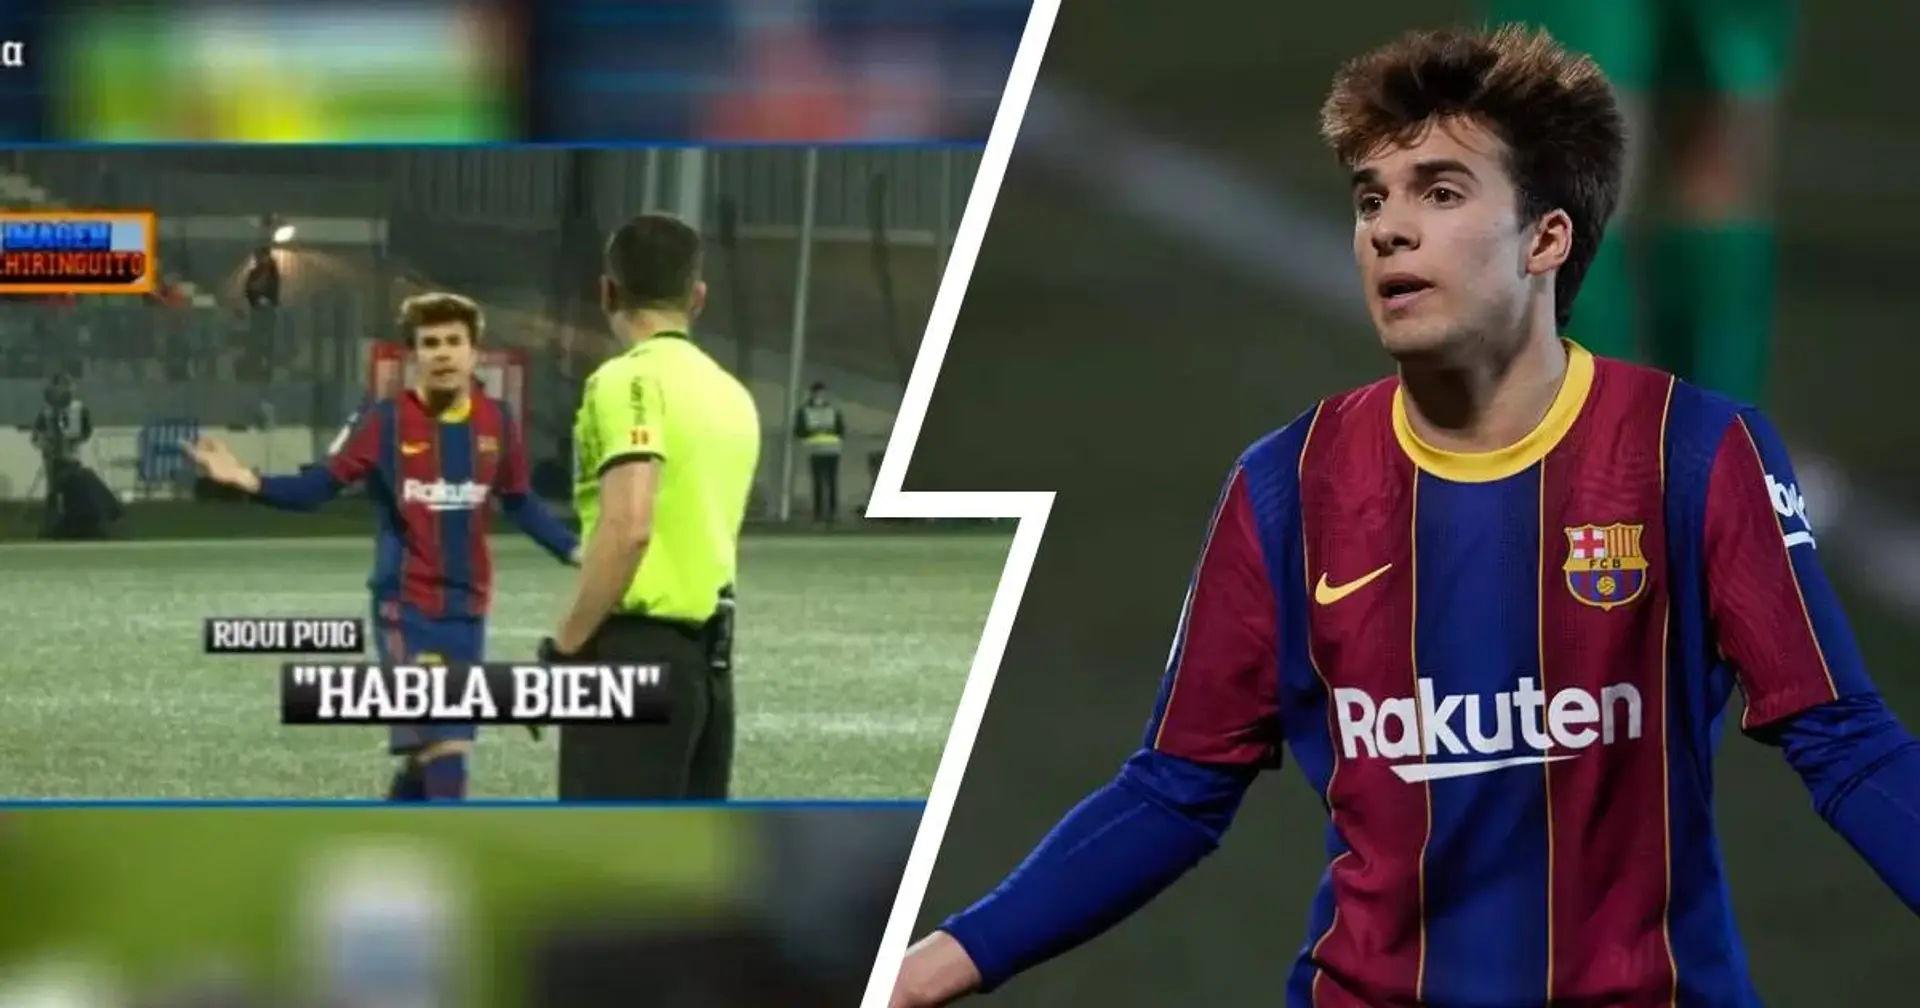 'Don't shout at me, kid': how Riqui Puig reportedly got his yellow card against Cornella